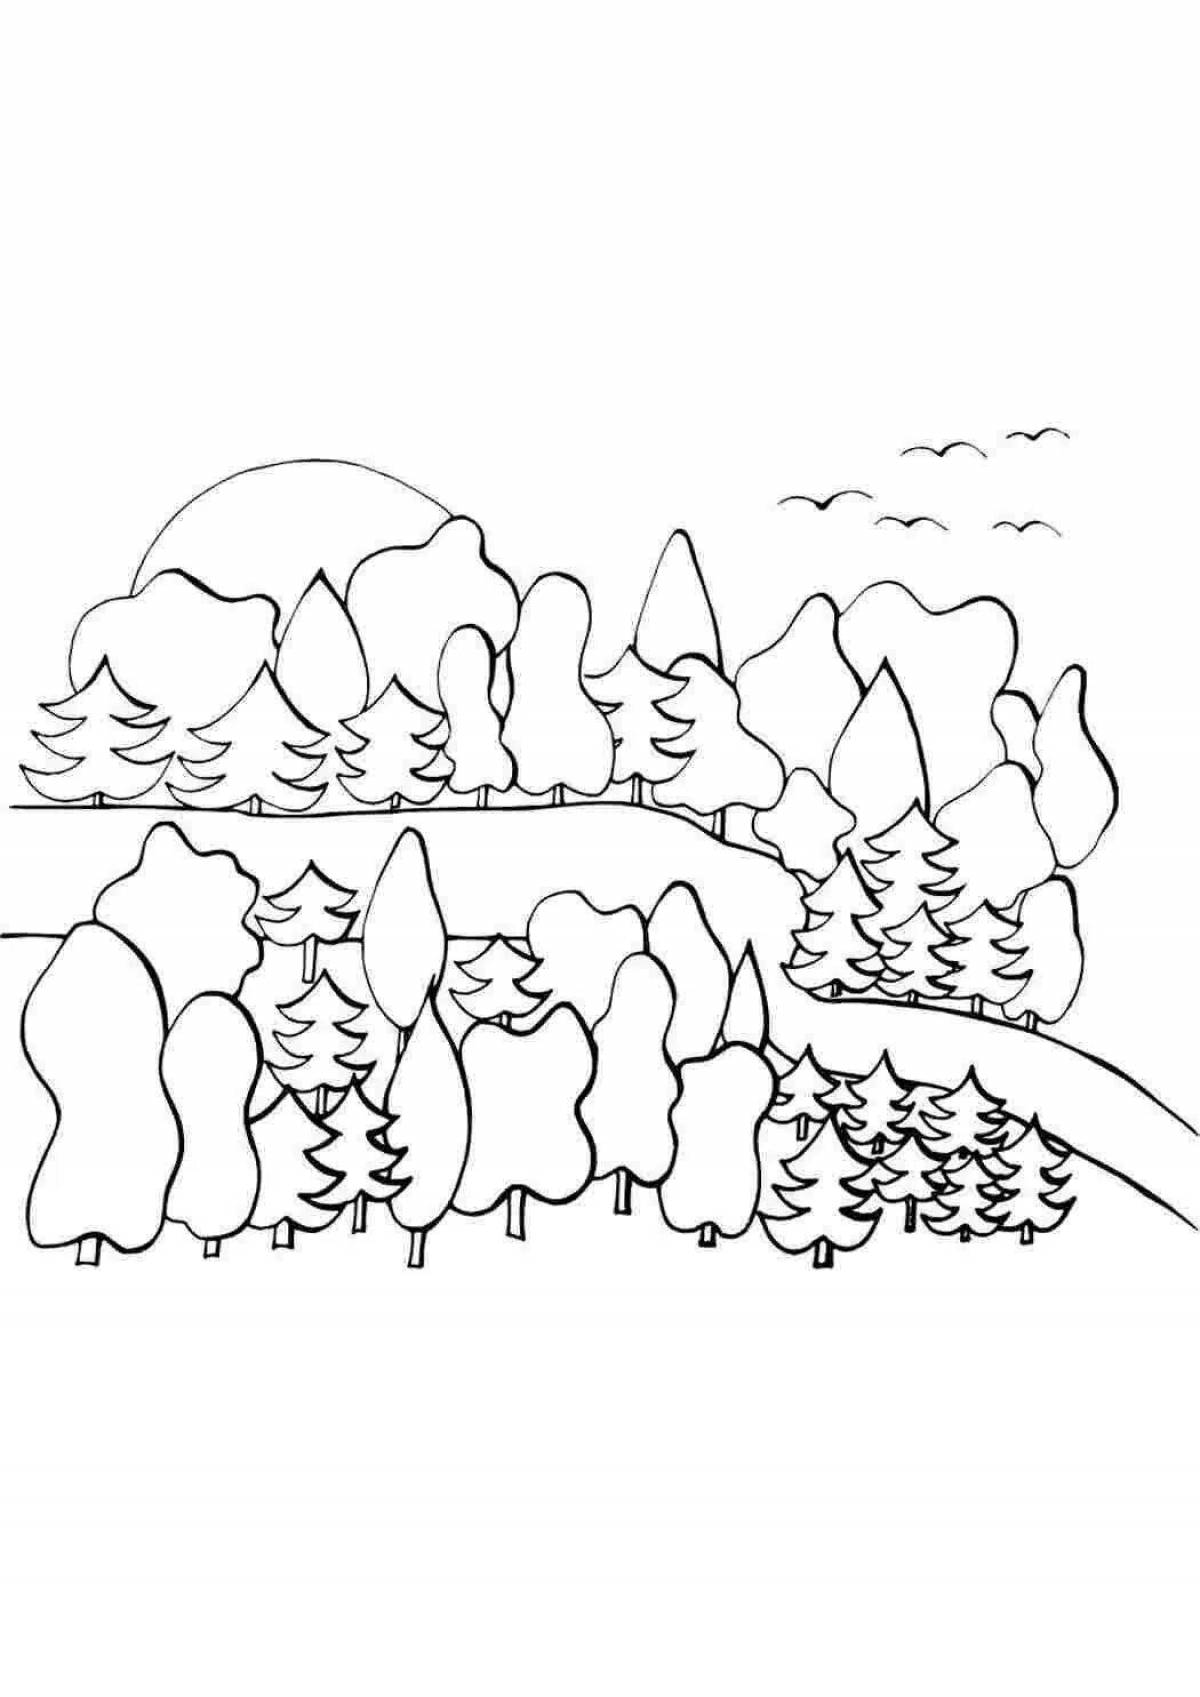 Rampant forest coloring book